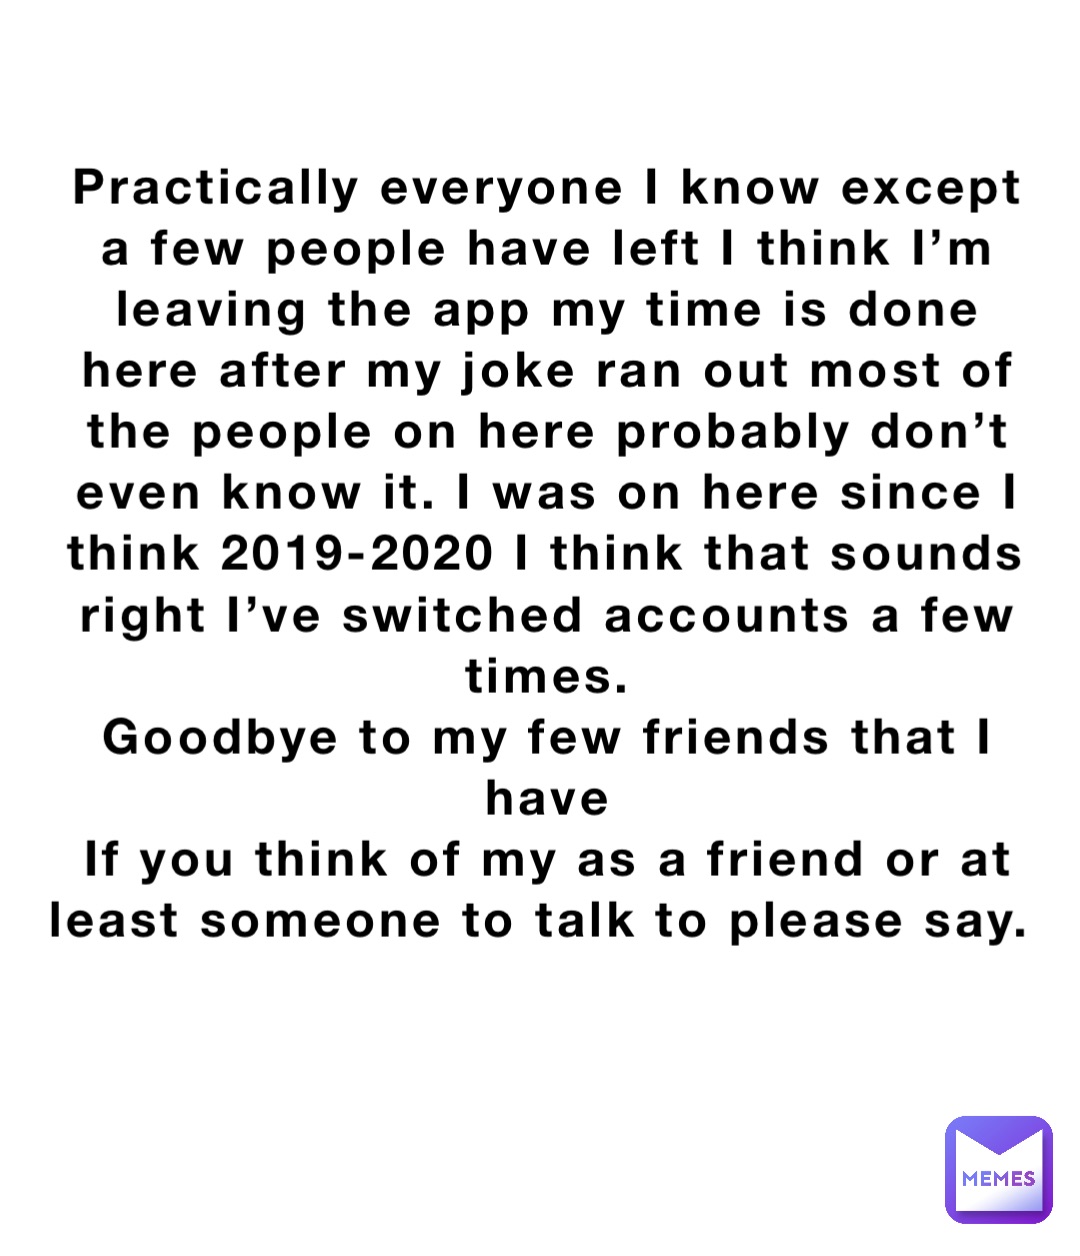 Practically everyone I know except a few people have left I think I’m leaving the app my time is done here after my joke ran out most of the people on here probably don’t even know it. I was on here since I think 2019-2020 I think that sounds right I’ve switched accounts a few times. 
Goodbye to my few friends that I have 
If you think of my as a friend or at least someone to talk to please say.